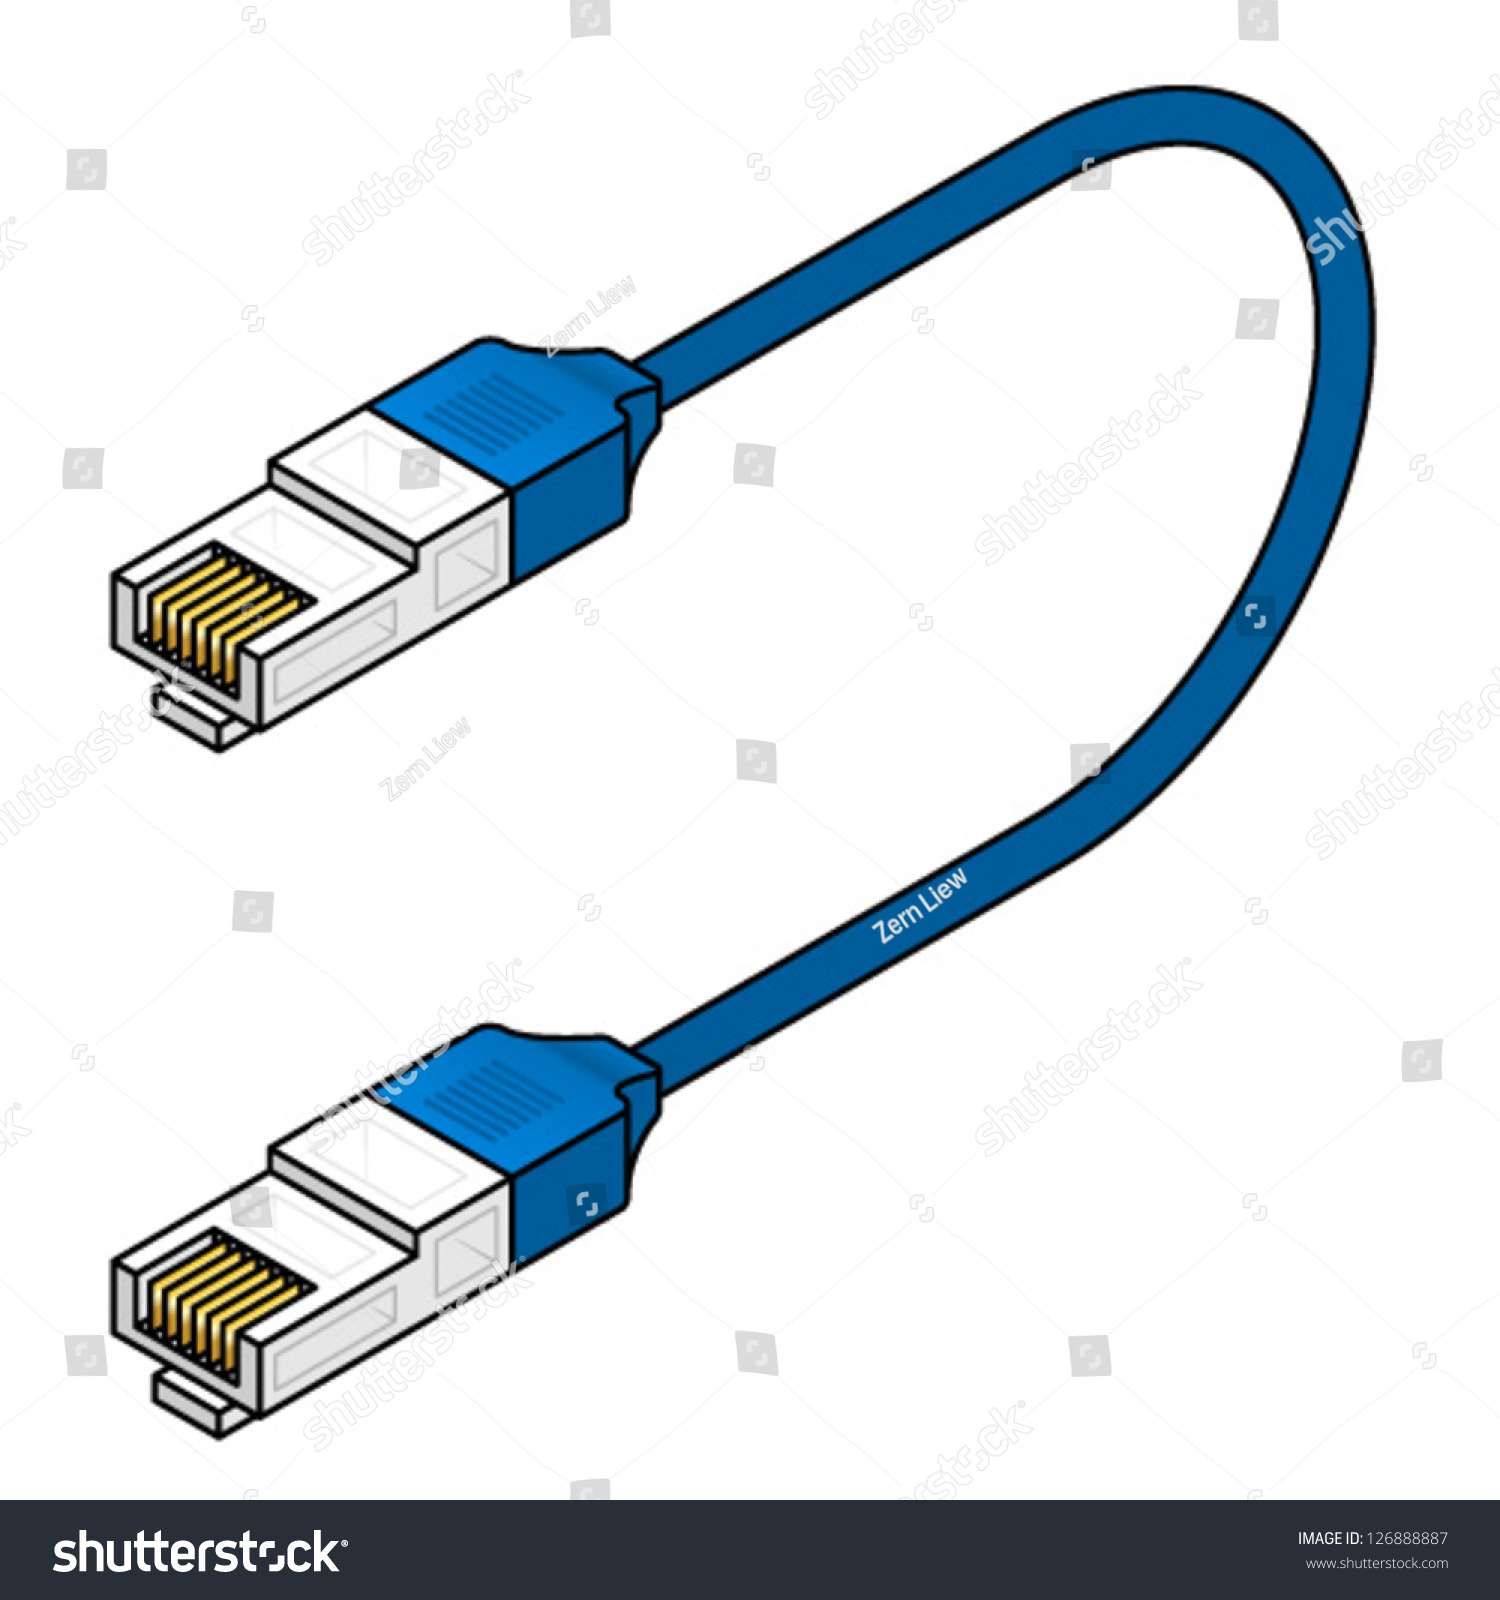 clipart network cable - photo #10